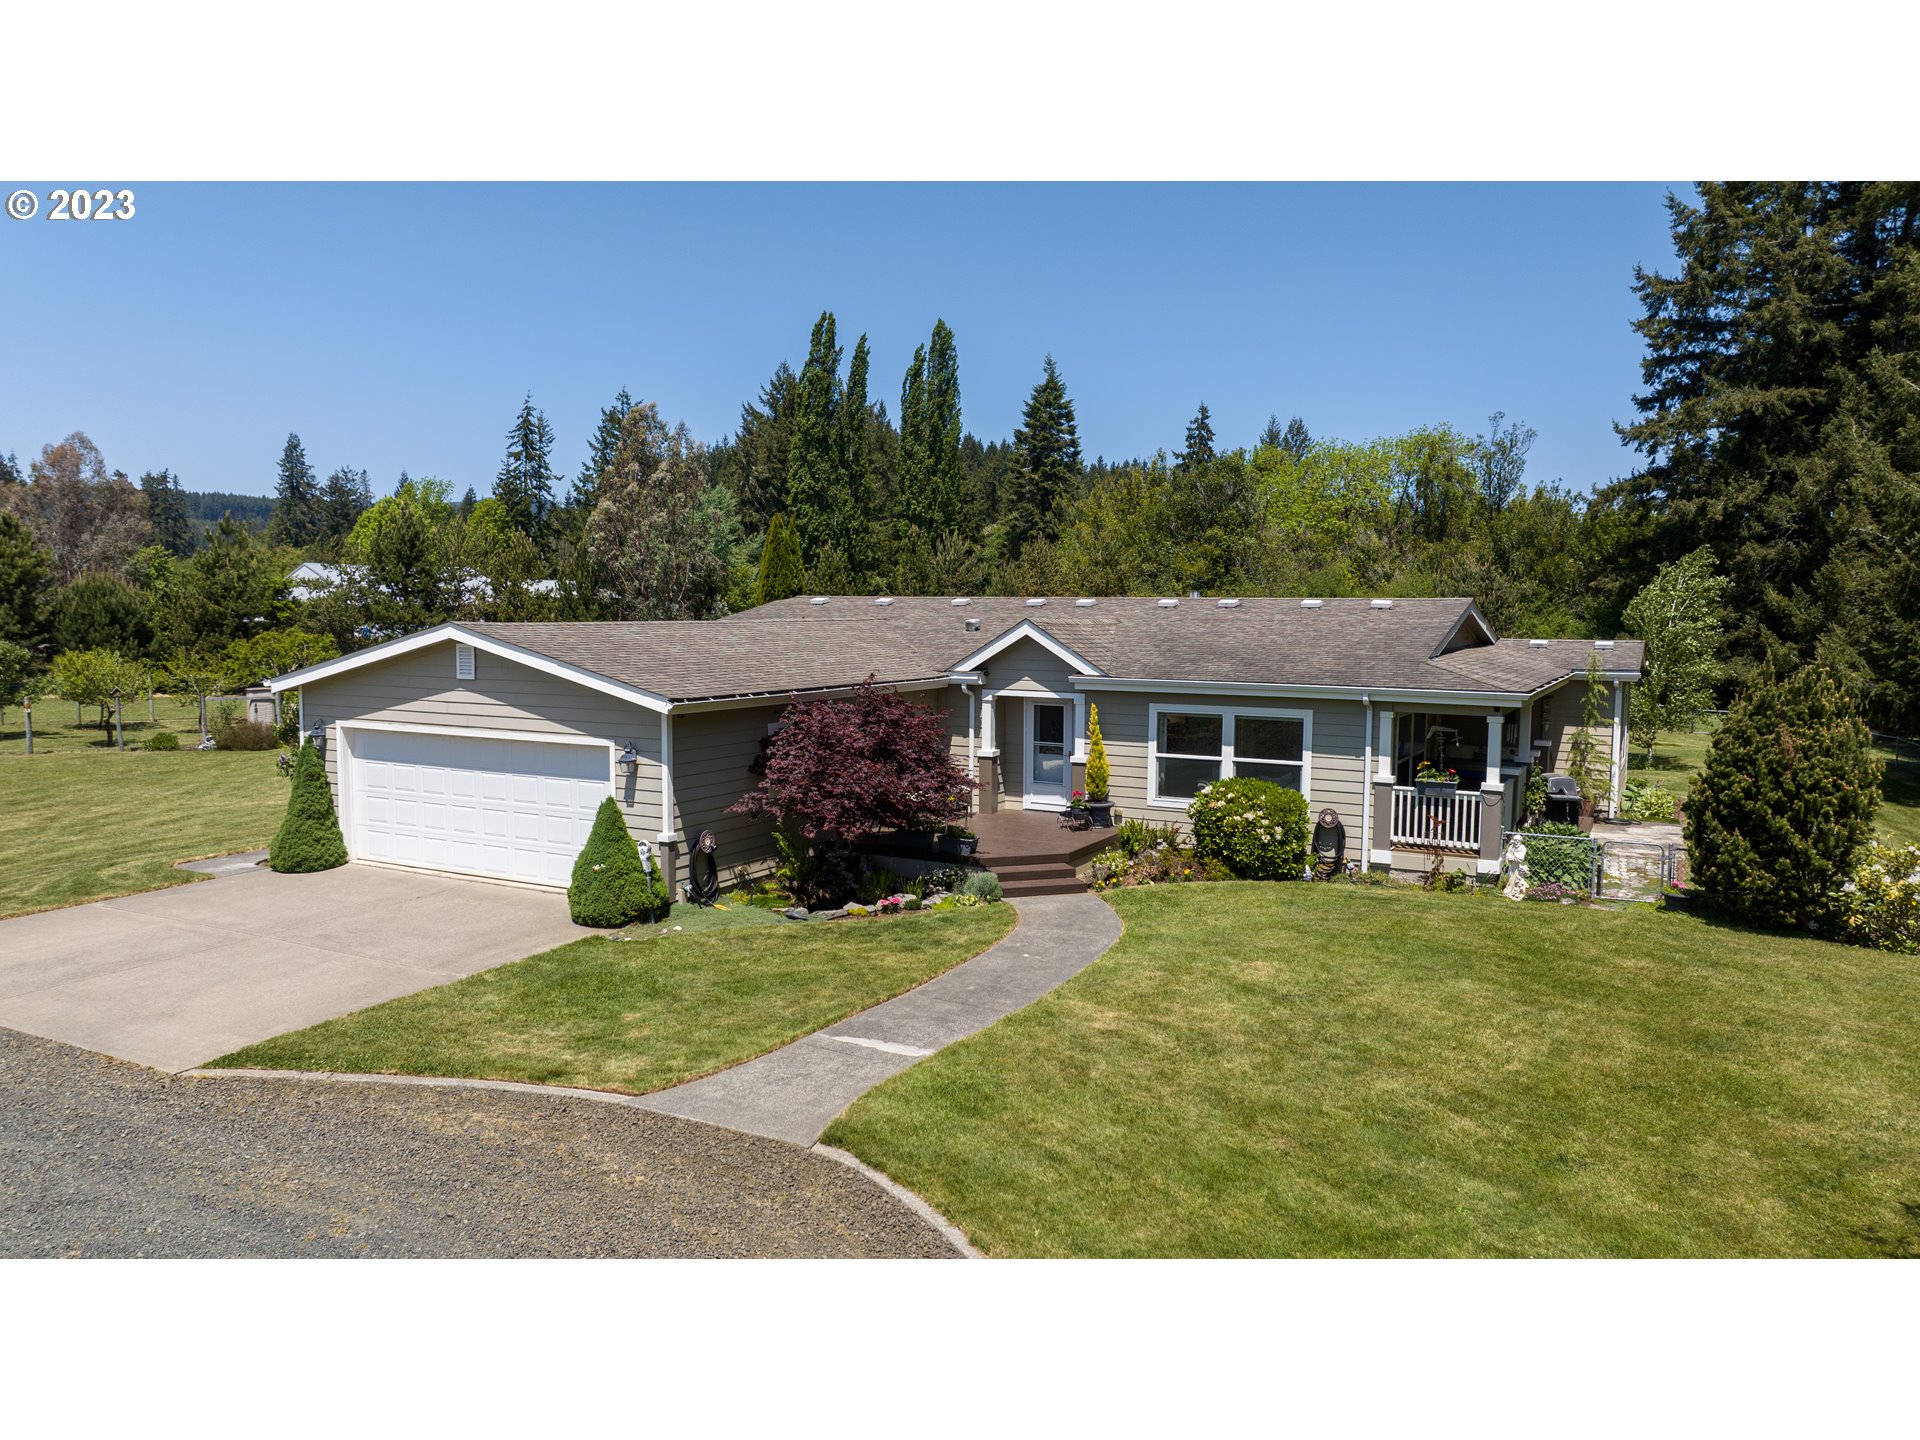 96873 LONE PINE LN, Coquille, OR 97423